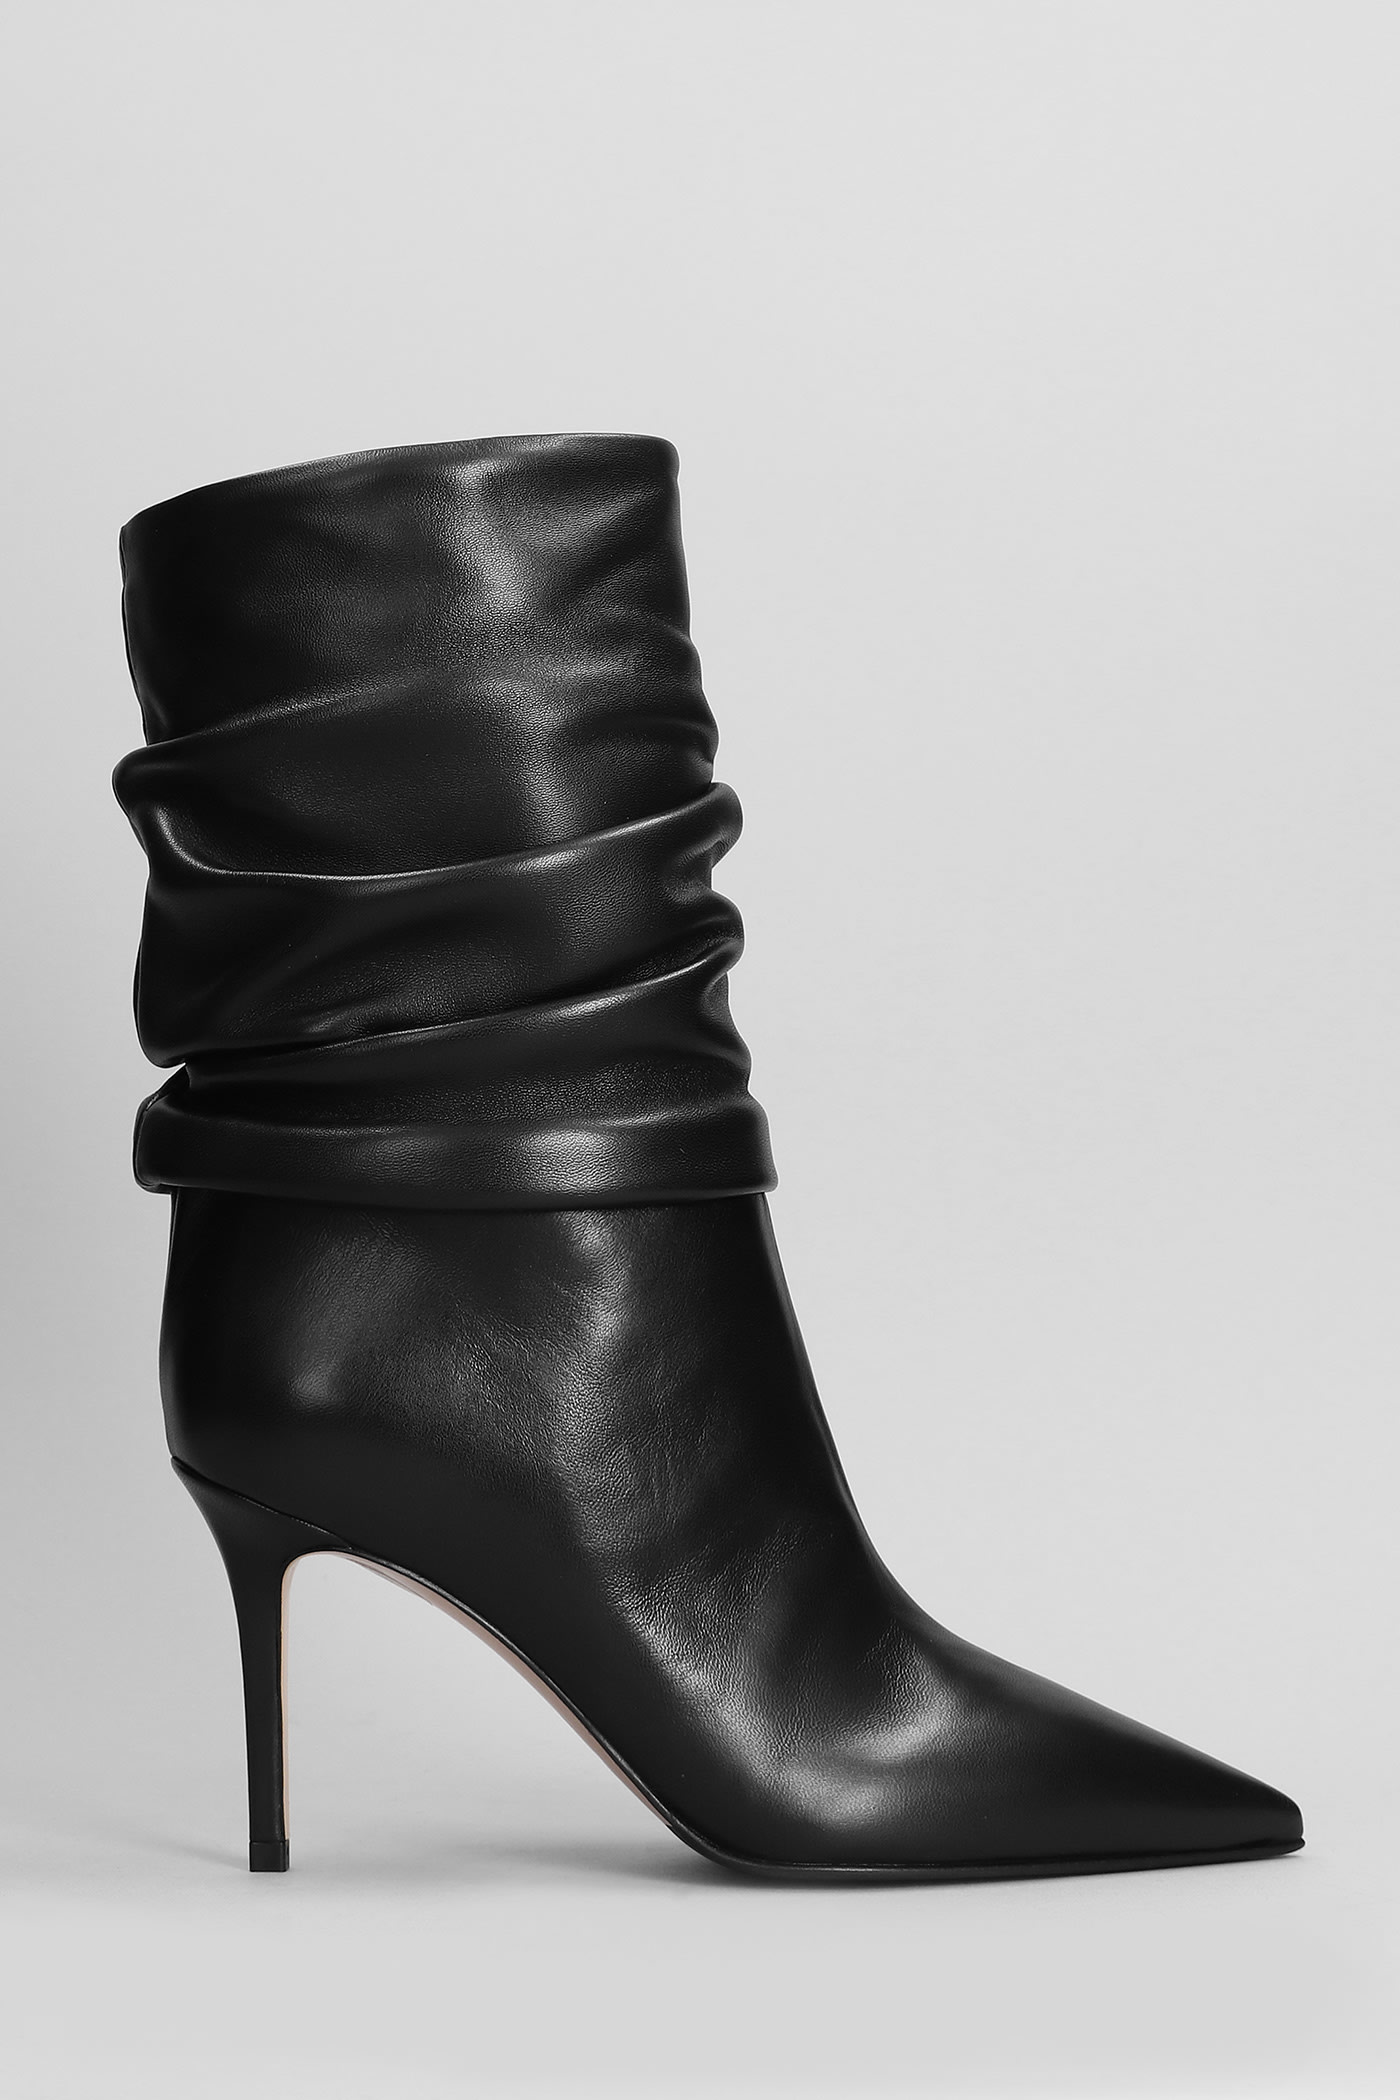 LE SILLA EVA 90 HIGH HEELS ANKLE BOOTS IN BLACK LEATHER